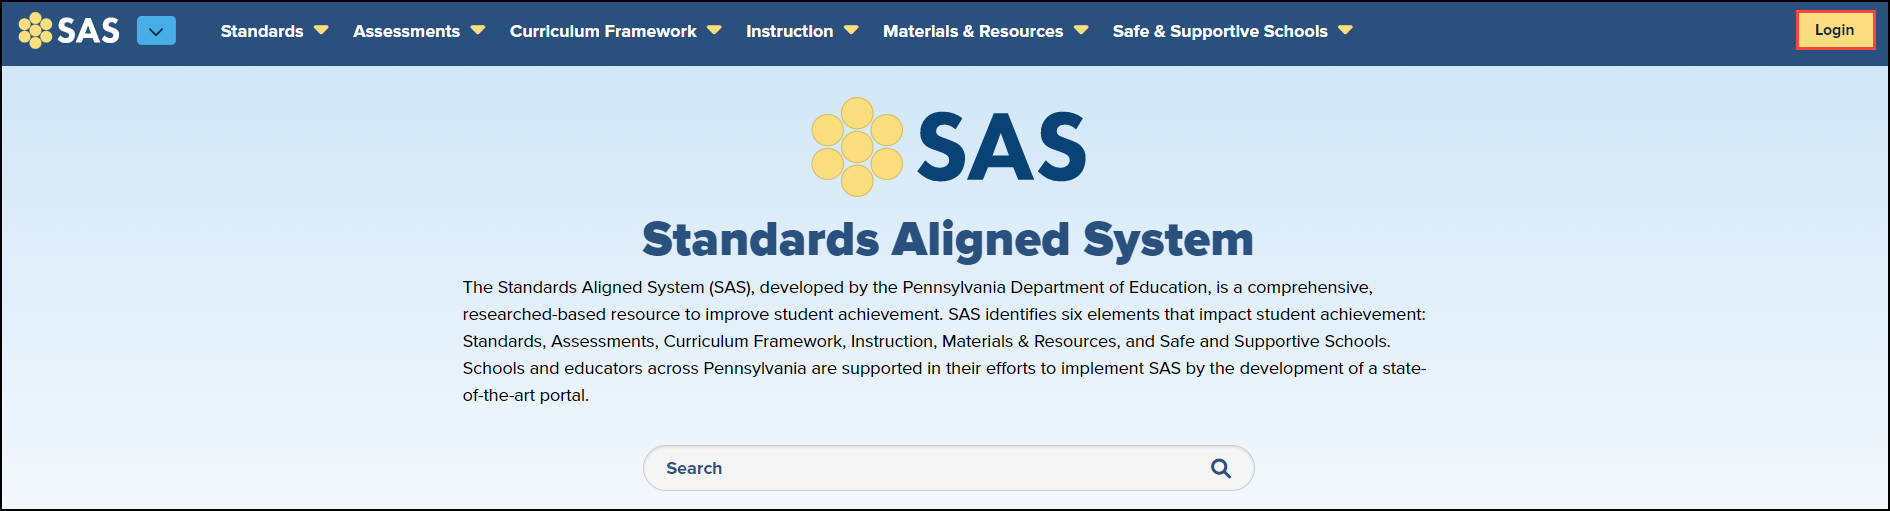 SAS homepage with login button highlighted